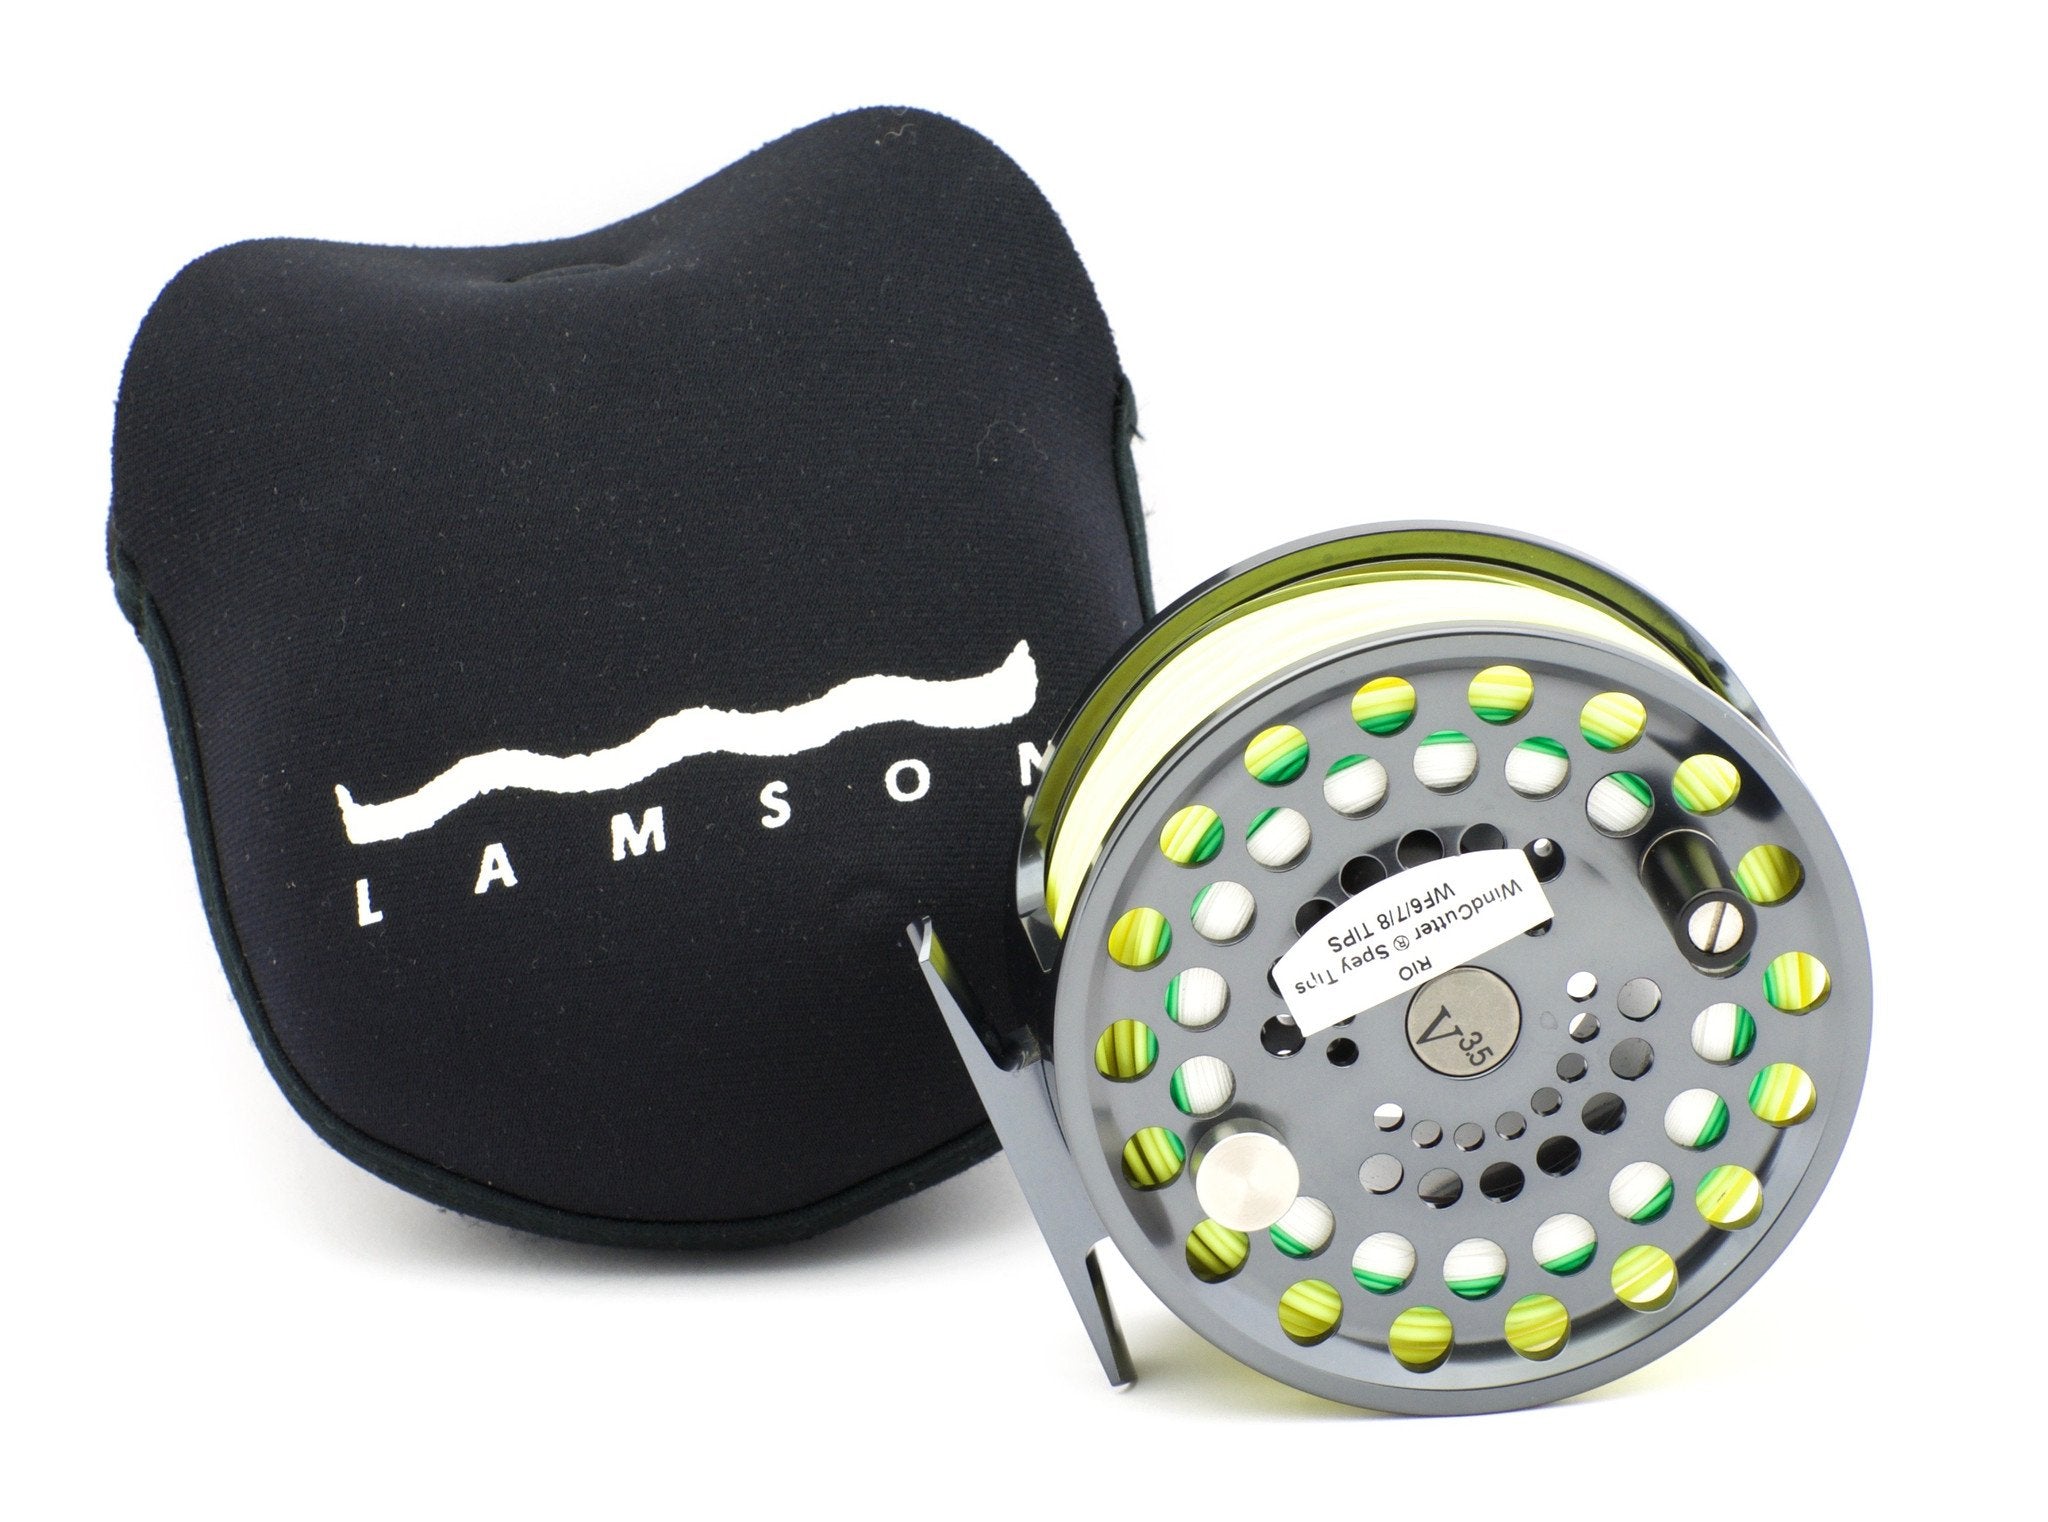 3.5 Lamson Trout Fly Reel, USA & Spare Spool – Ireland's Antique